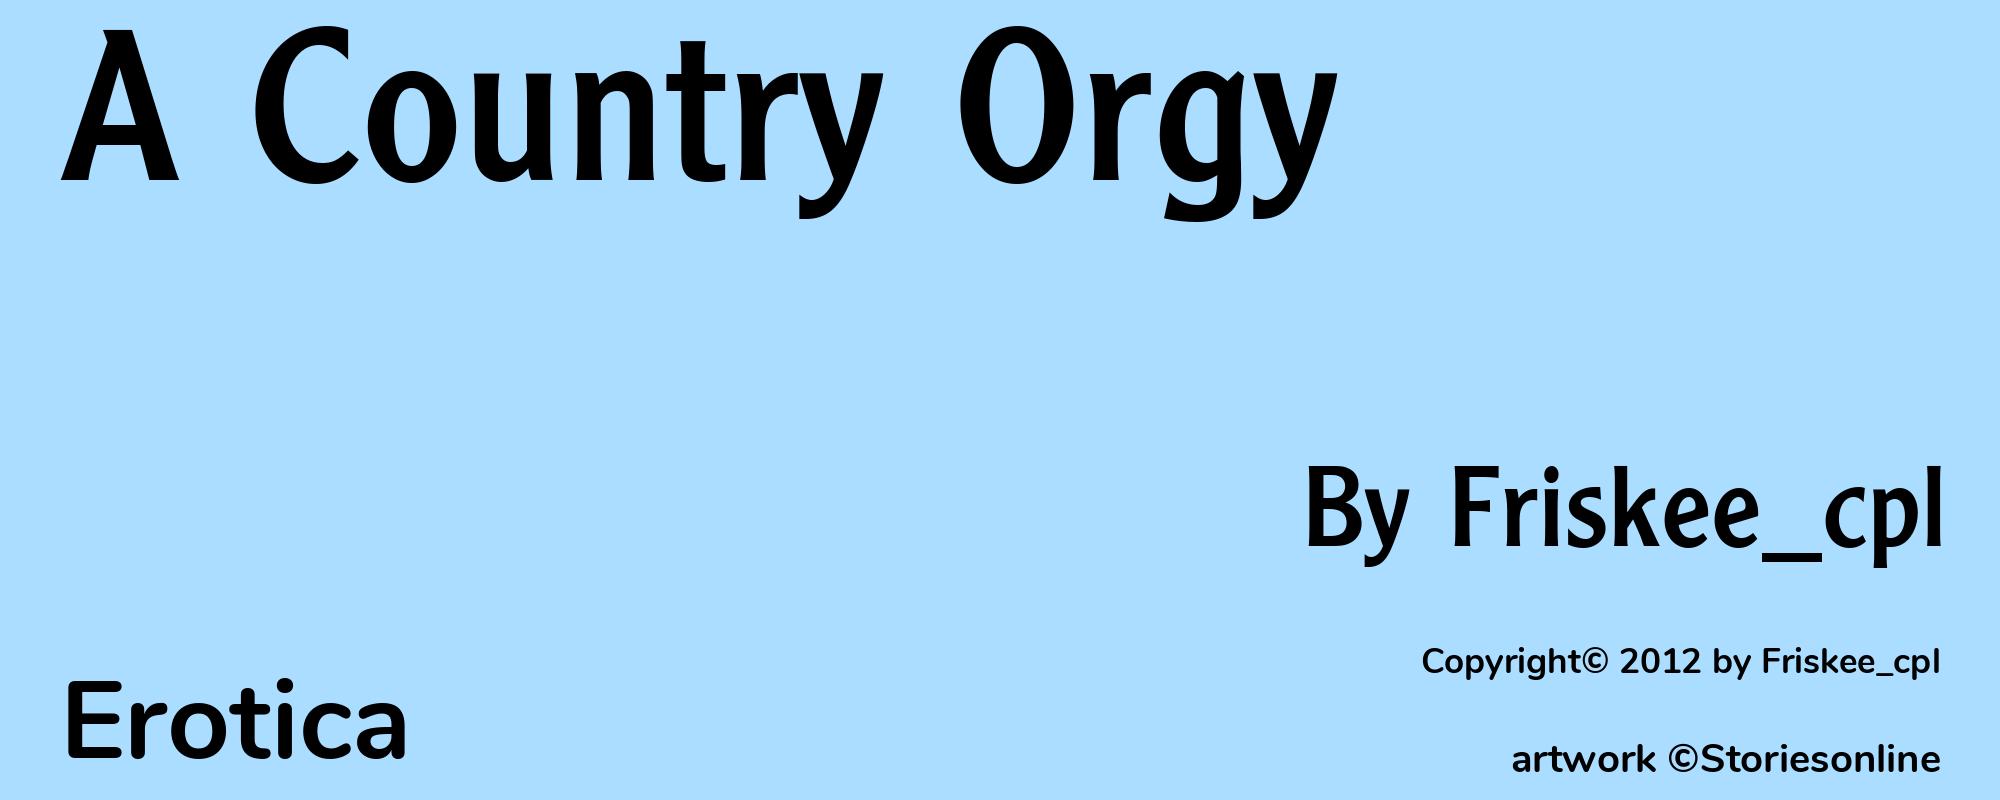 A Country Orgy - Cover